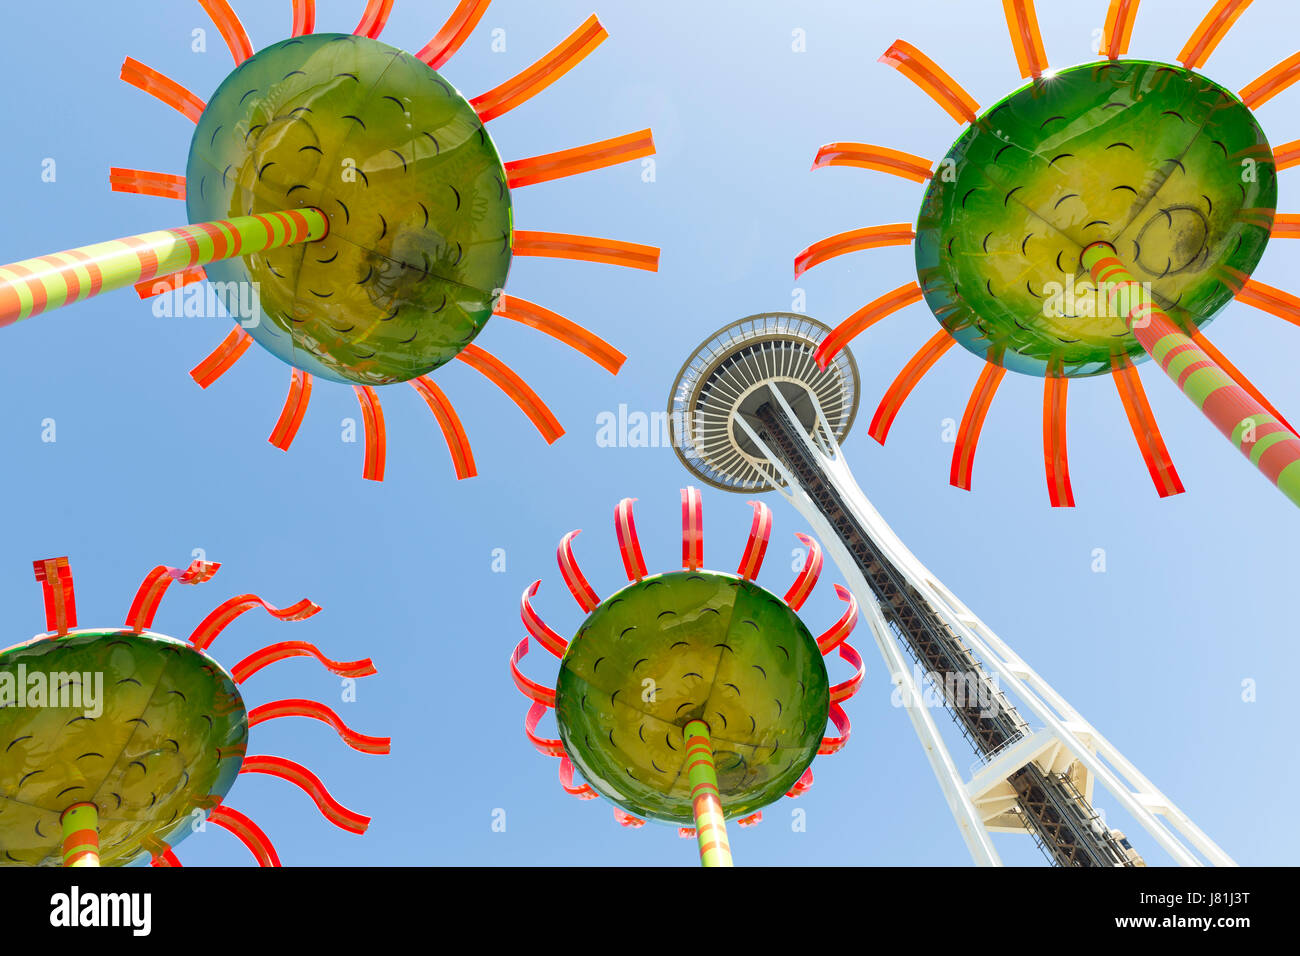 Seattle, Washington, USA. 26th May, 2017. The Space Needle framed by artist Dan Corson’s monumental floral sculptures “Sonic Boom” during the Northwest Folklife Festival. The annual festival of ethnic, folk, and traditional art, crafts, and music that takes place over the Memorial Day weekend in Seattle, Washington at Seattle Center. Founded in 1971 by the Seattle Folklore Society, the National Park Service and the National Folk Festival Association. Credit: Paul Gordon/Alamy Live News Stock Photo